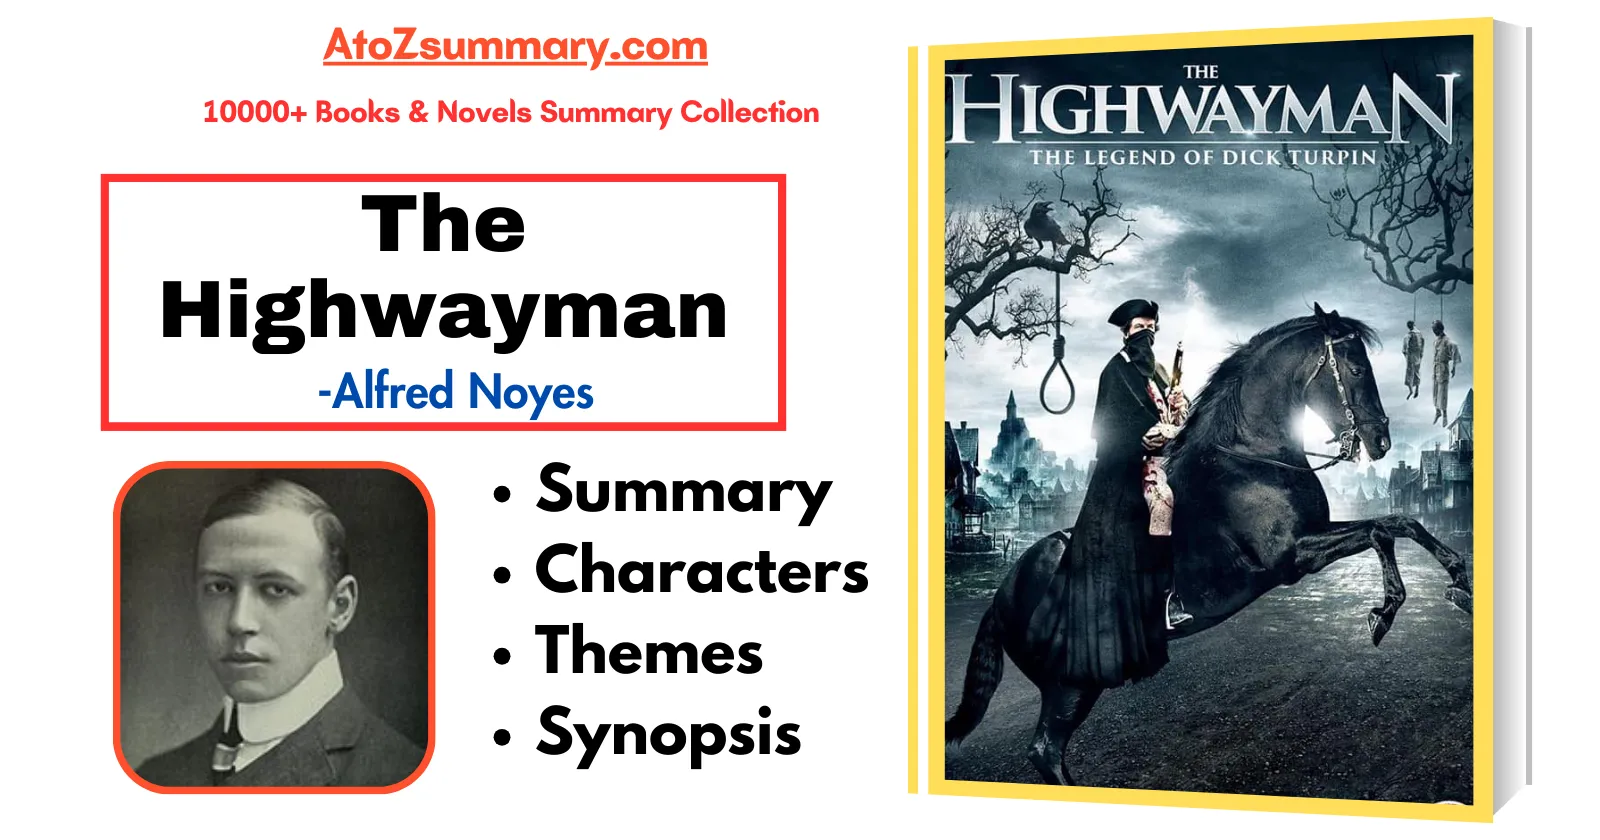 The Highwayman by Alfred Noyes Summary & Analysis